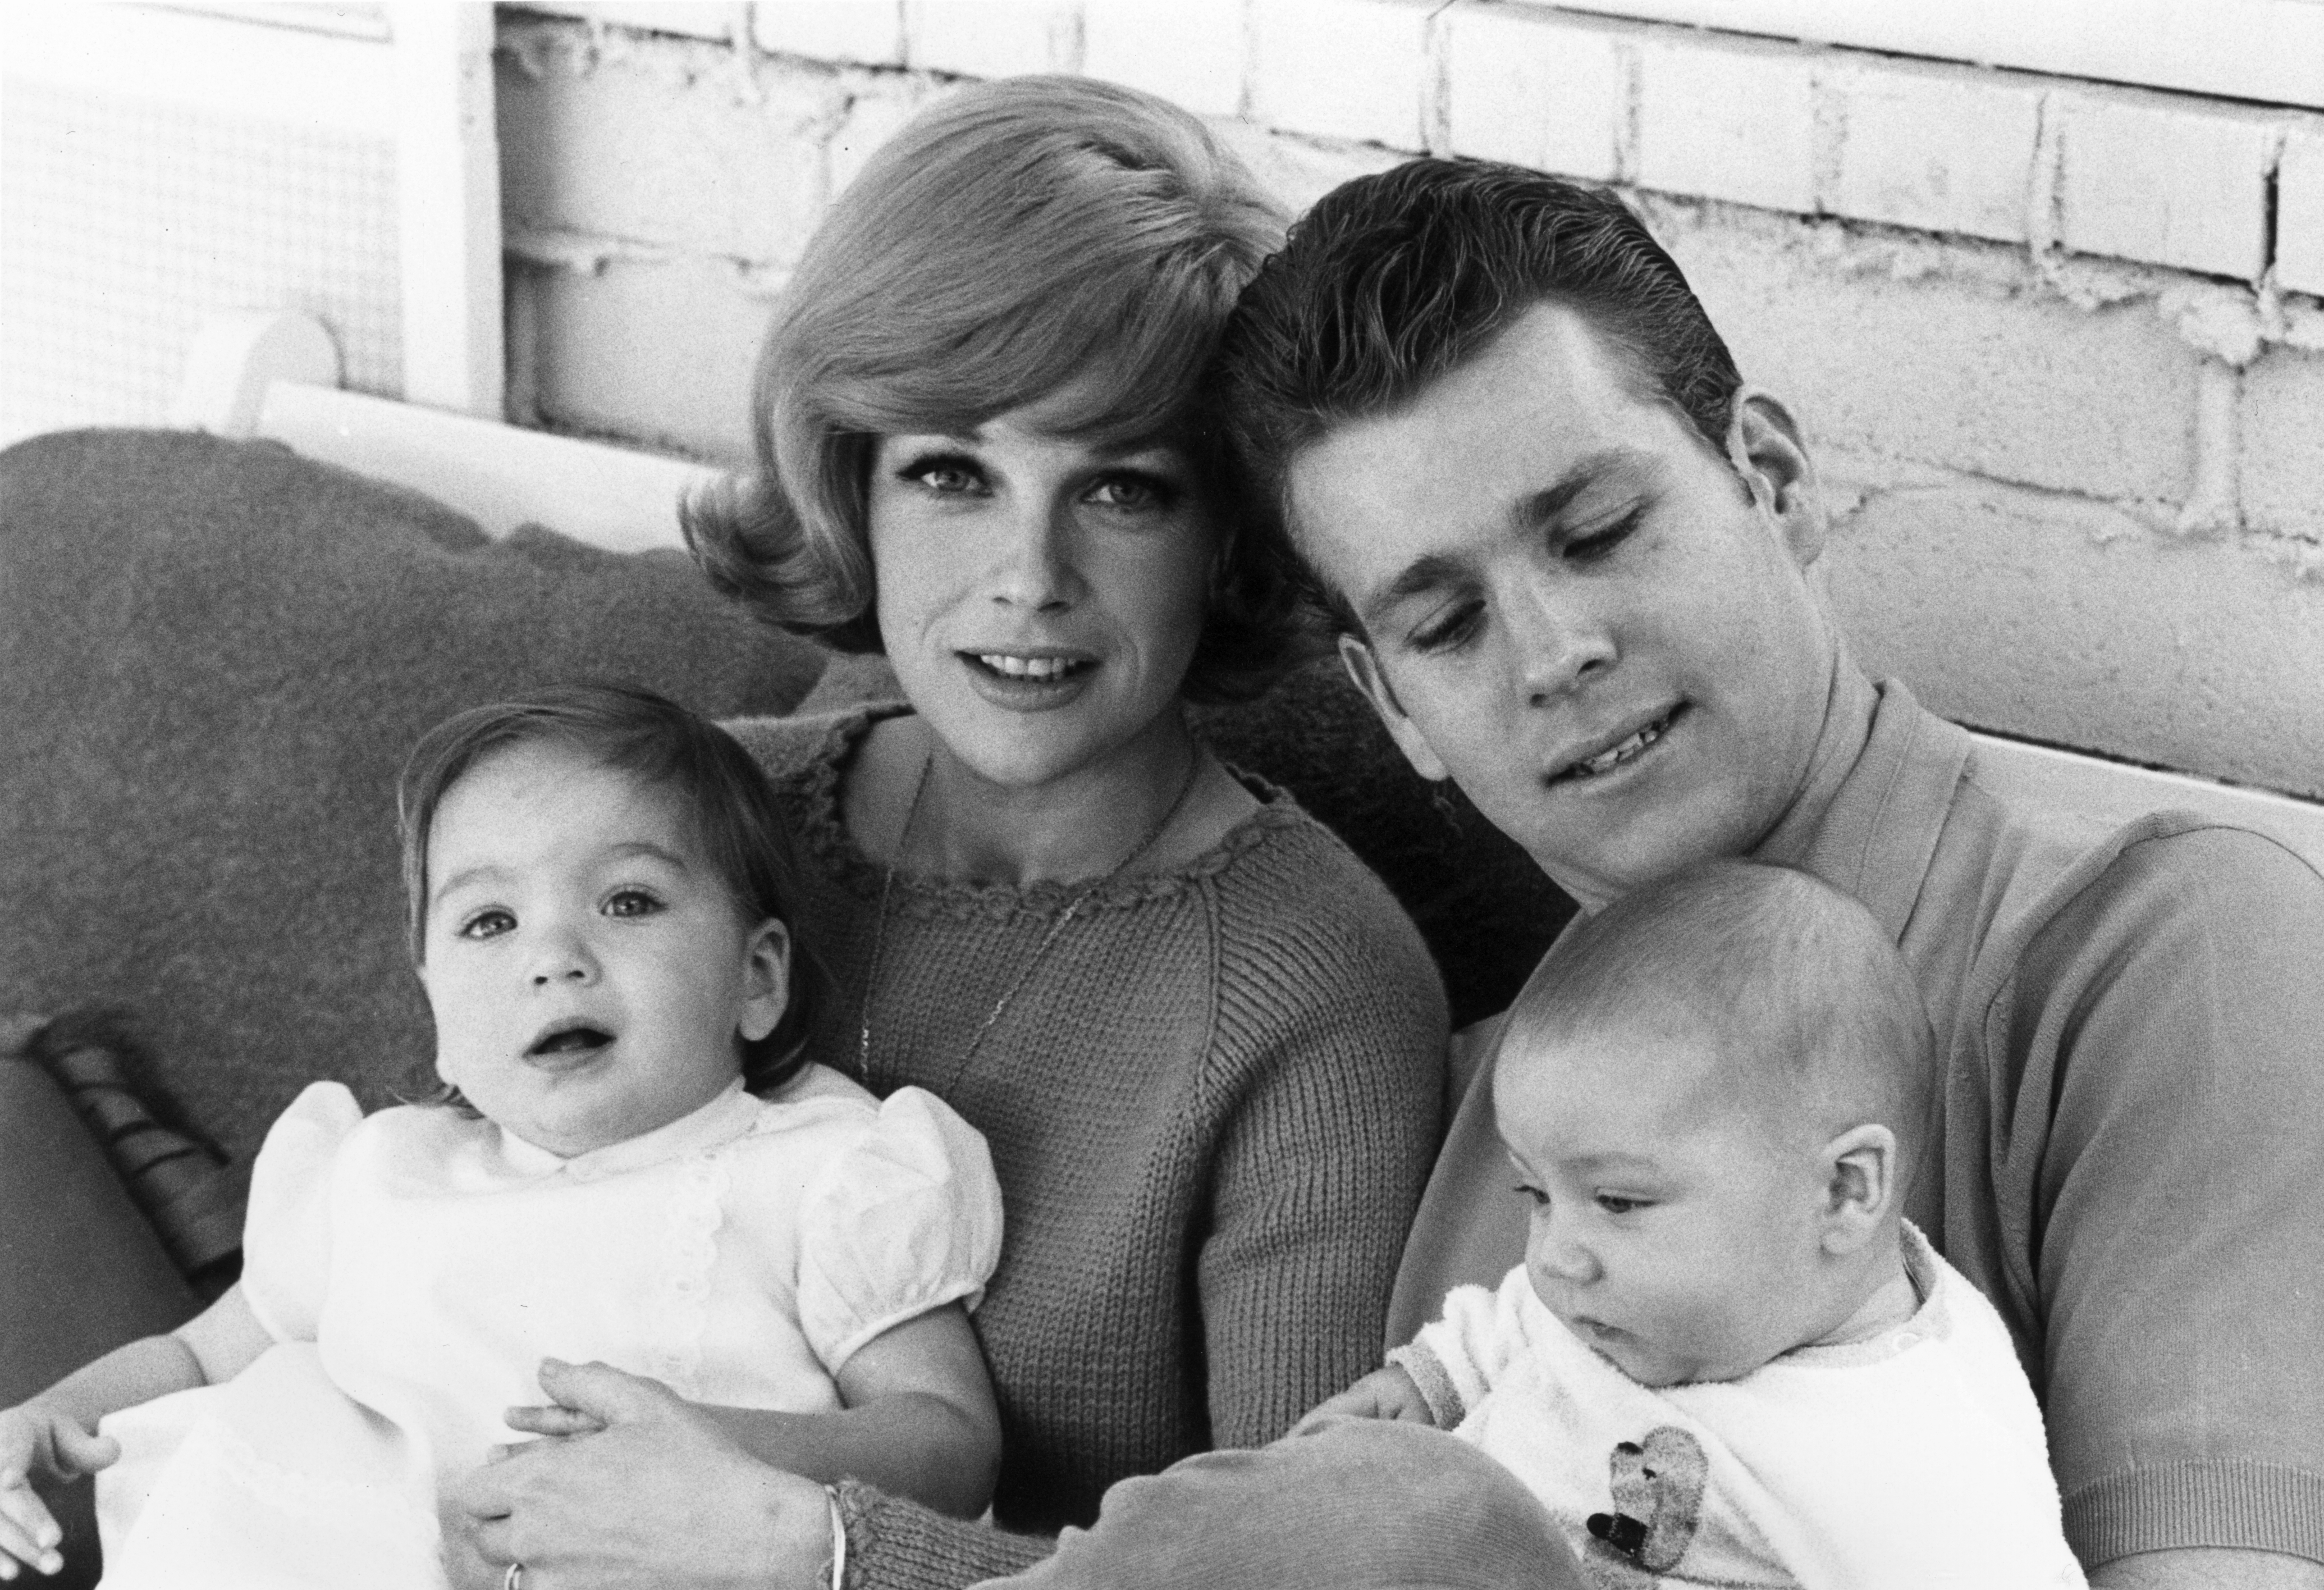 Ryan O'Neal seated with his son, Griffin, and Joanna Moore, who has their daughter, Tatum, on her lap, 1965.| Source: Getty Images